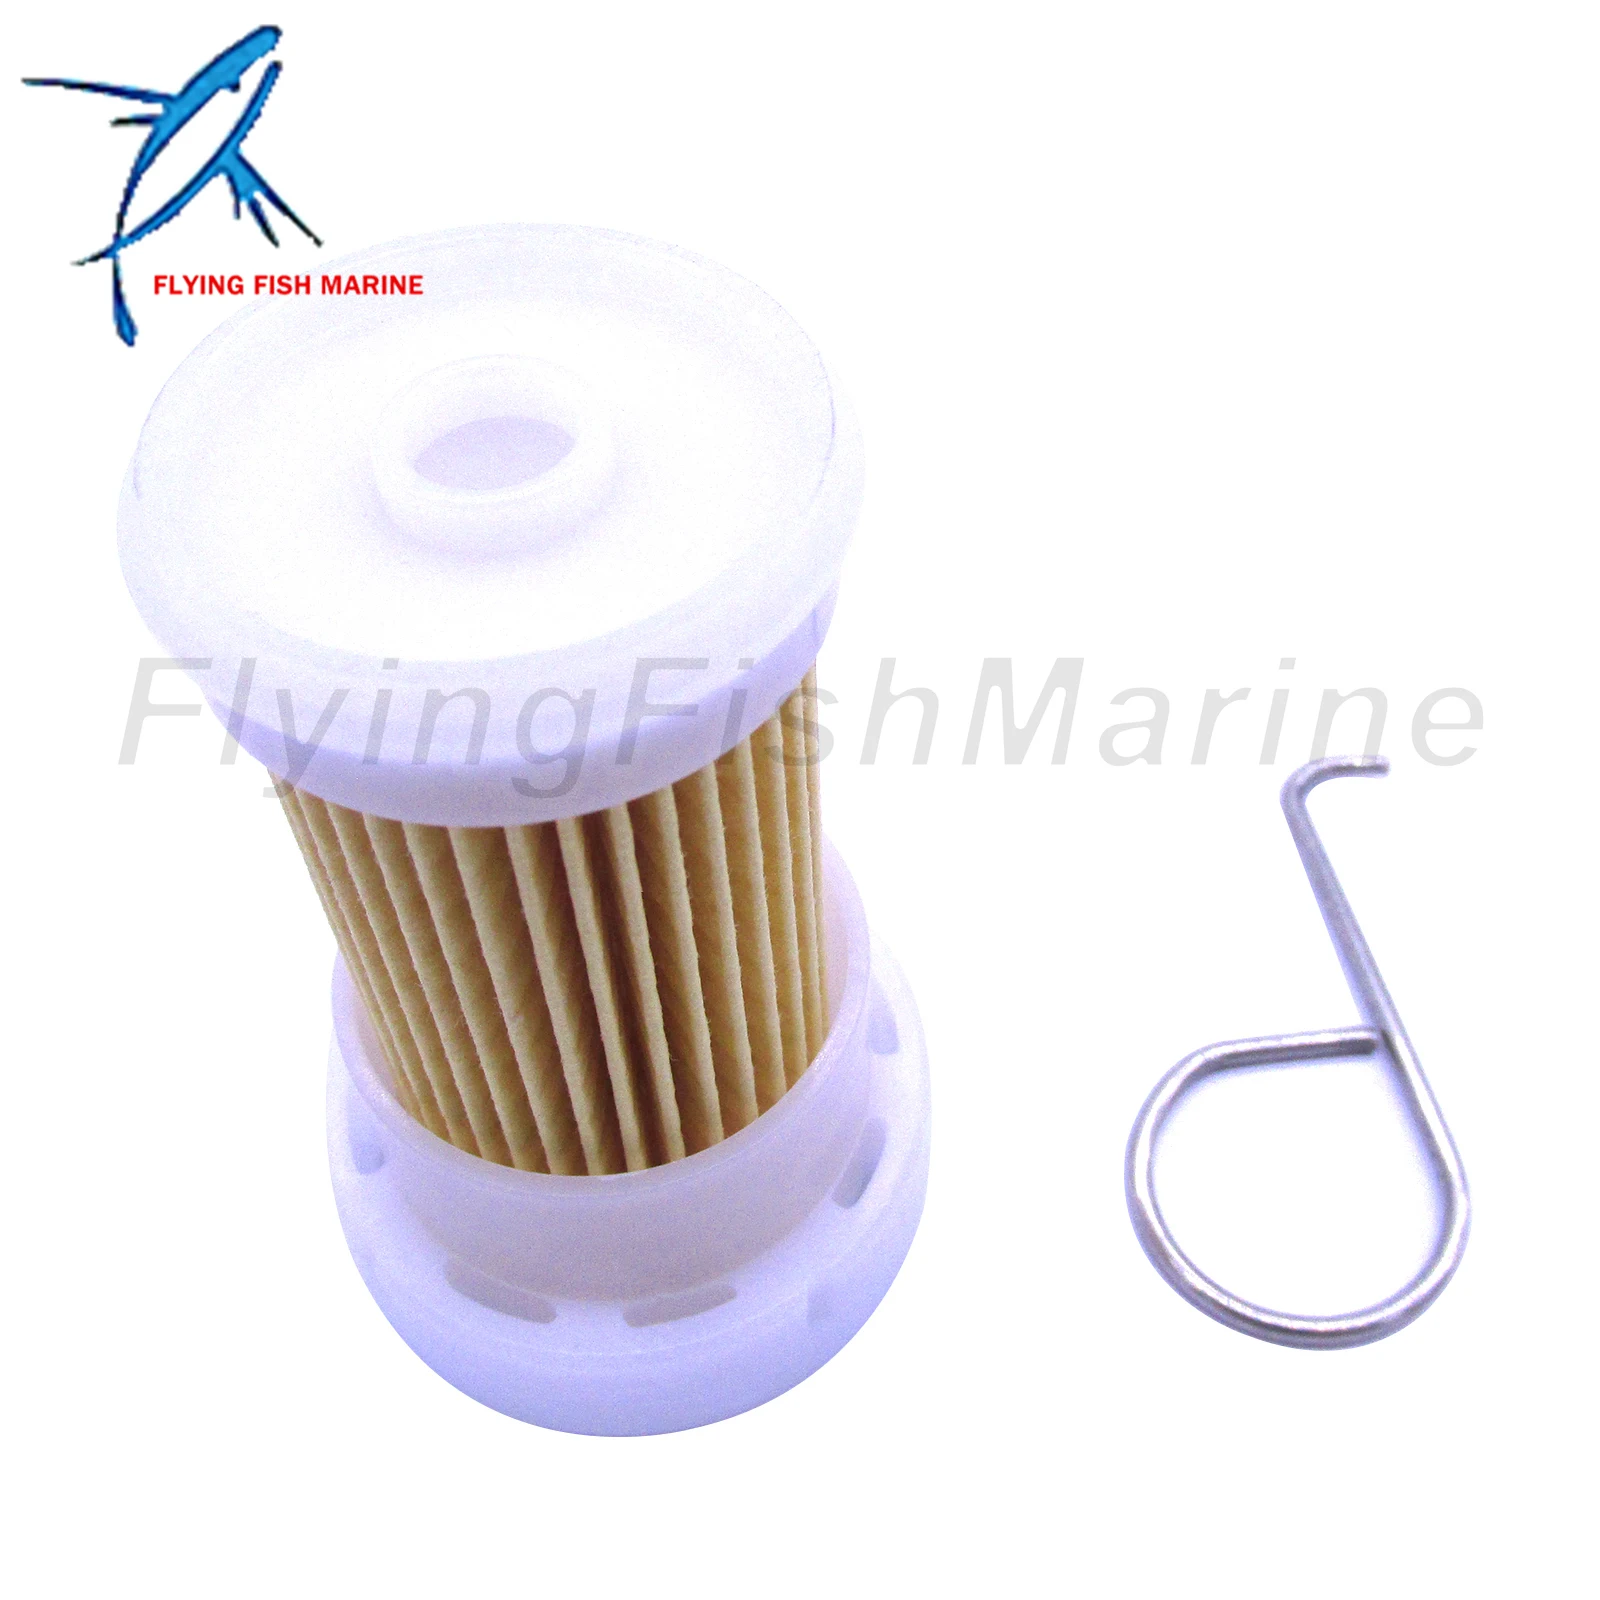 

Outboard Motor 6P2-24563-00 6P2-WS245-00 Fuel Filter Element for Yamaha F250 250HP Boat Engine, 18-7518